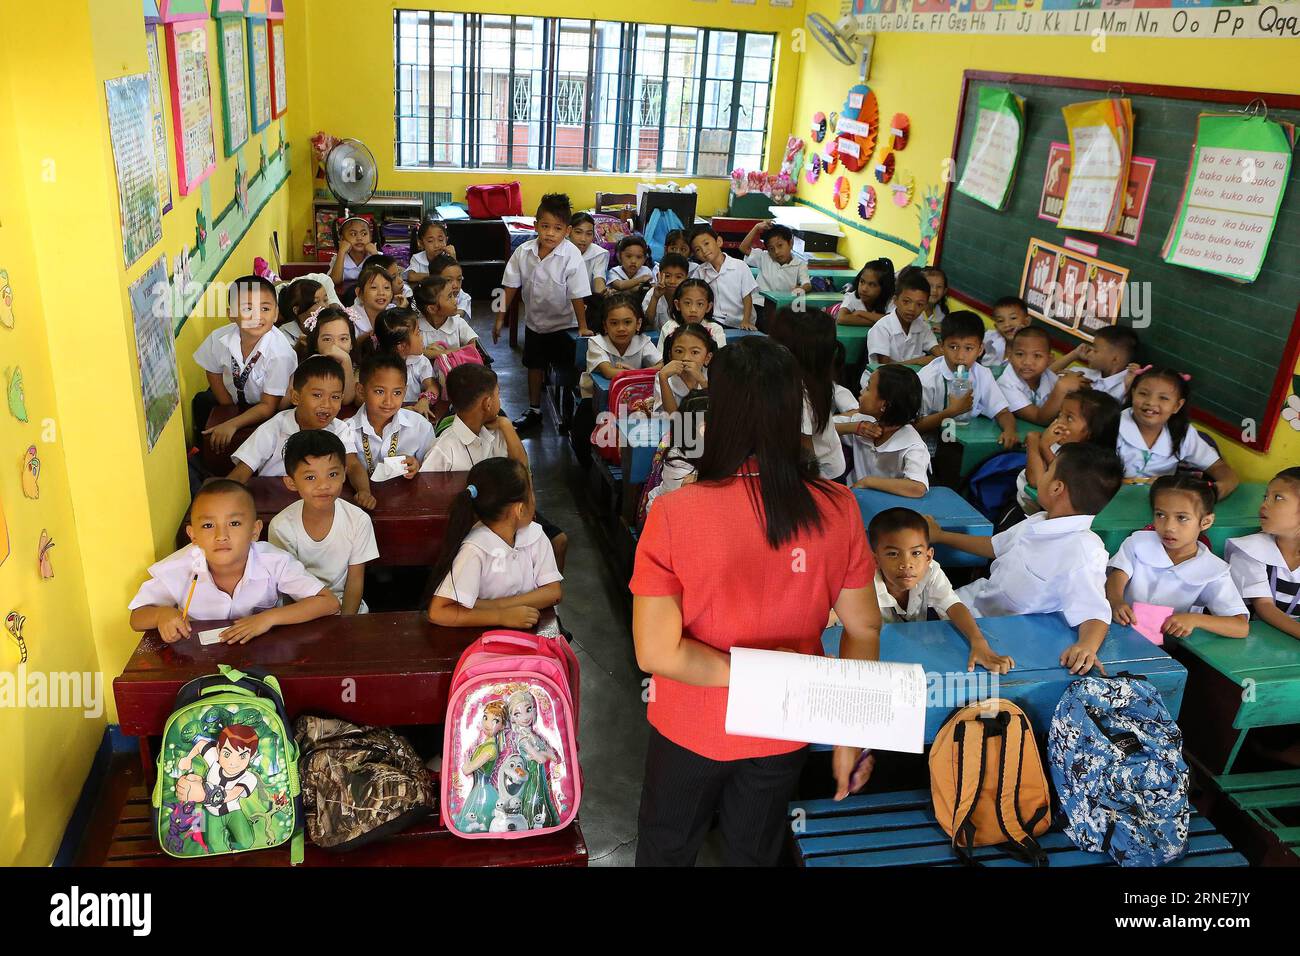 (160613) -- QUEZON CITY (THE PHILIPPINES), June 13, 2016 -- Students listen to their teacher during the first day of school at the President Corazon Aquino Elementary School in Quezon City, the Philippines, on June 13, 2016. Around 25 million students attended elementary and high school classes all over the country at the beginning of the school year 2016-2017, according to the Philippine Department of Education. ) THE PHILIPPINES-QUEZON CITY-FIRST DAY OF SCHOOL RouellexUmali PUBLICATIONxNOTxINxCHN   160613 Quezon City The Philippines June 13 2016 Students Lists to their Teacher during The Fir Stock Photo